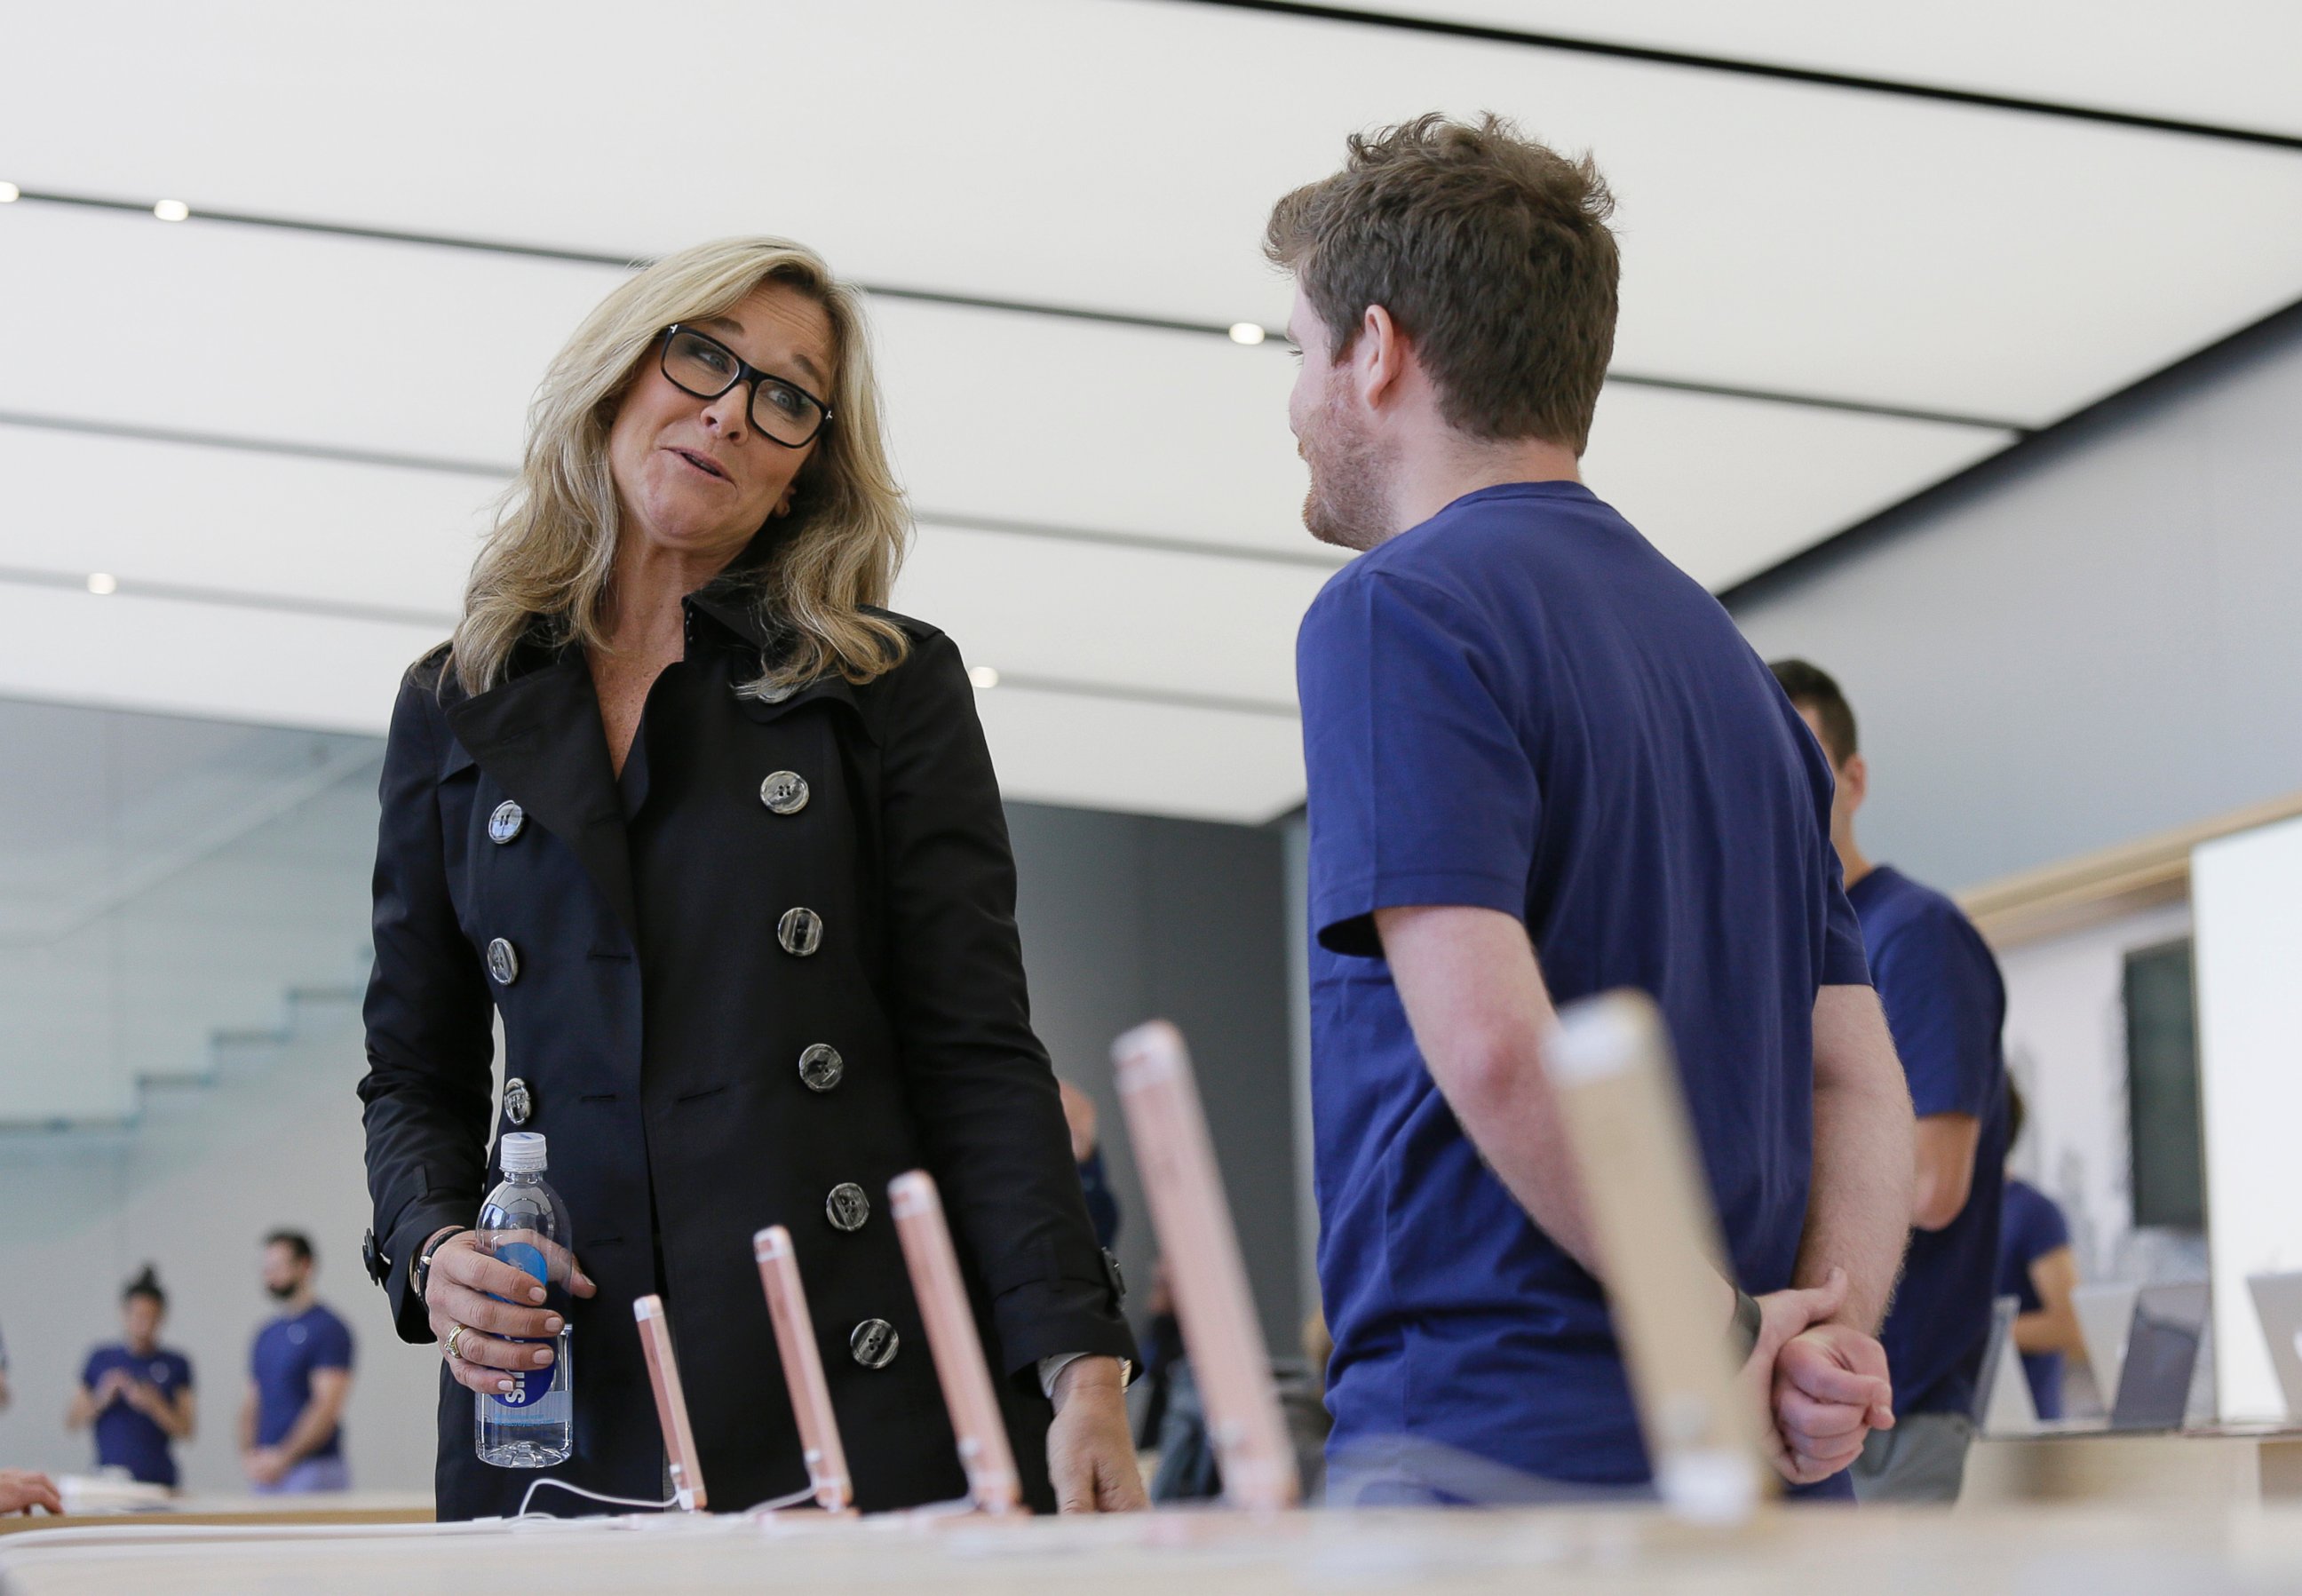 Angela Ahrendts, Apple's senior vice president of retail and online stores, speaks with an employee during a preview of the new Apple Union Square store, Thursday, May 19, 2016, in San Francisco.